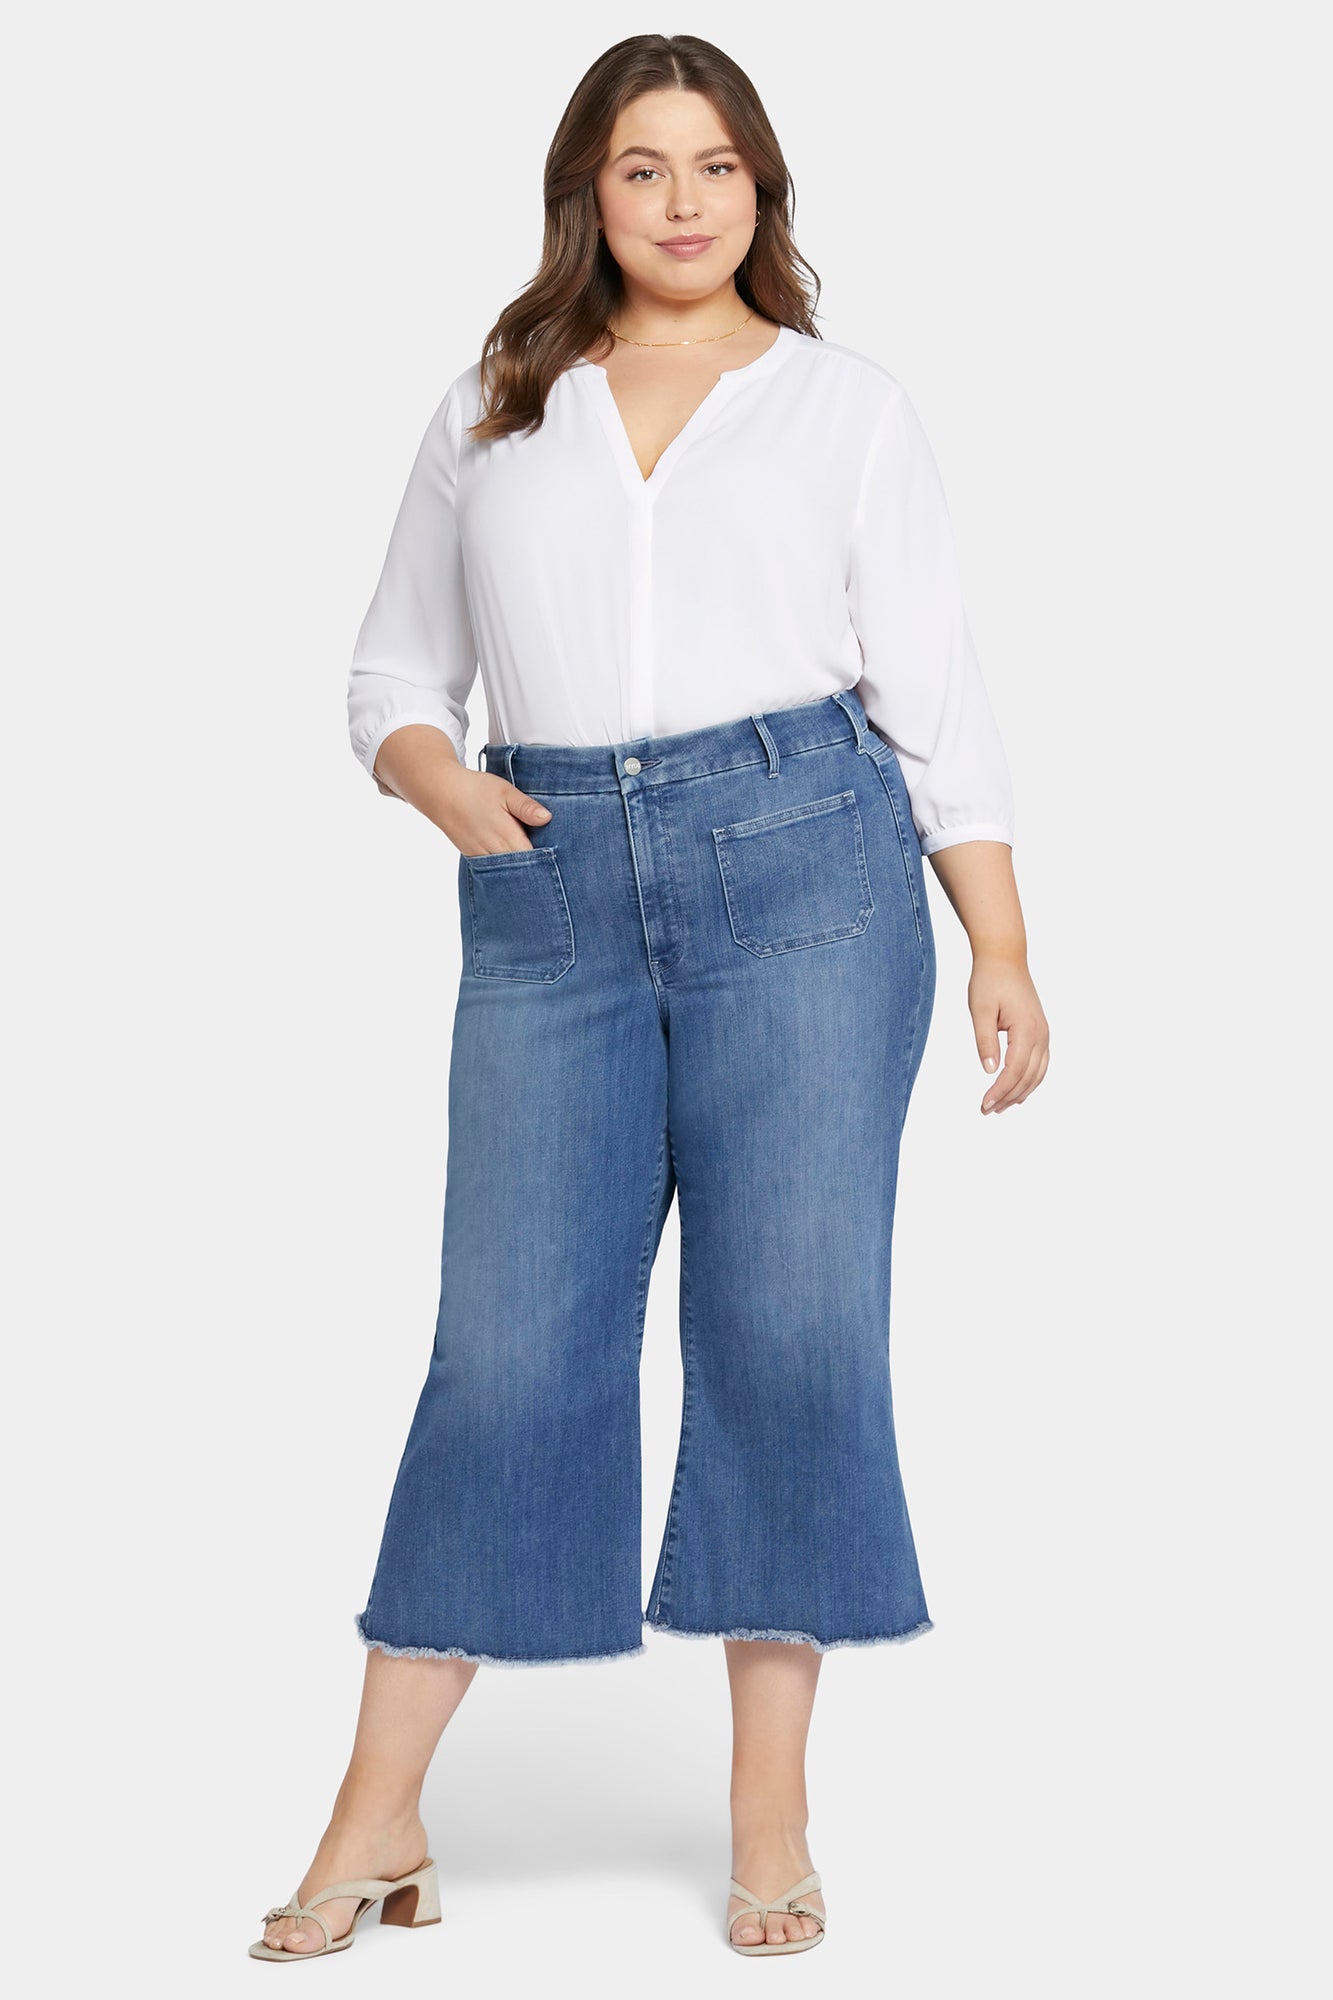 NYDJ Patchie Wide Leg Capri Jeans In Petite Plus Size With Frayed Hems - Compass